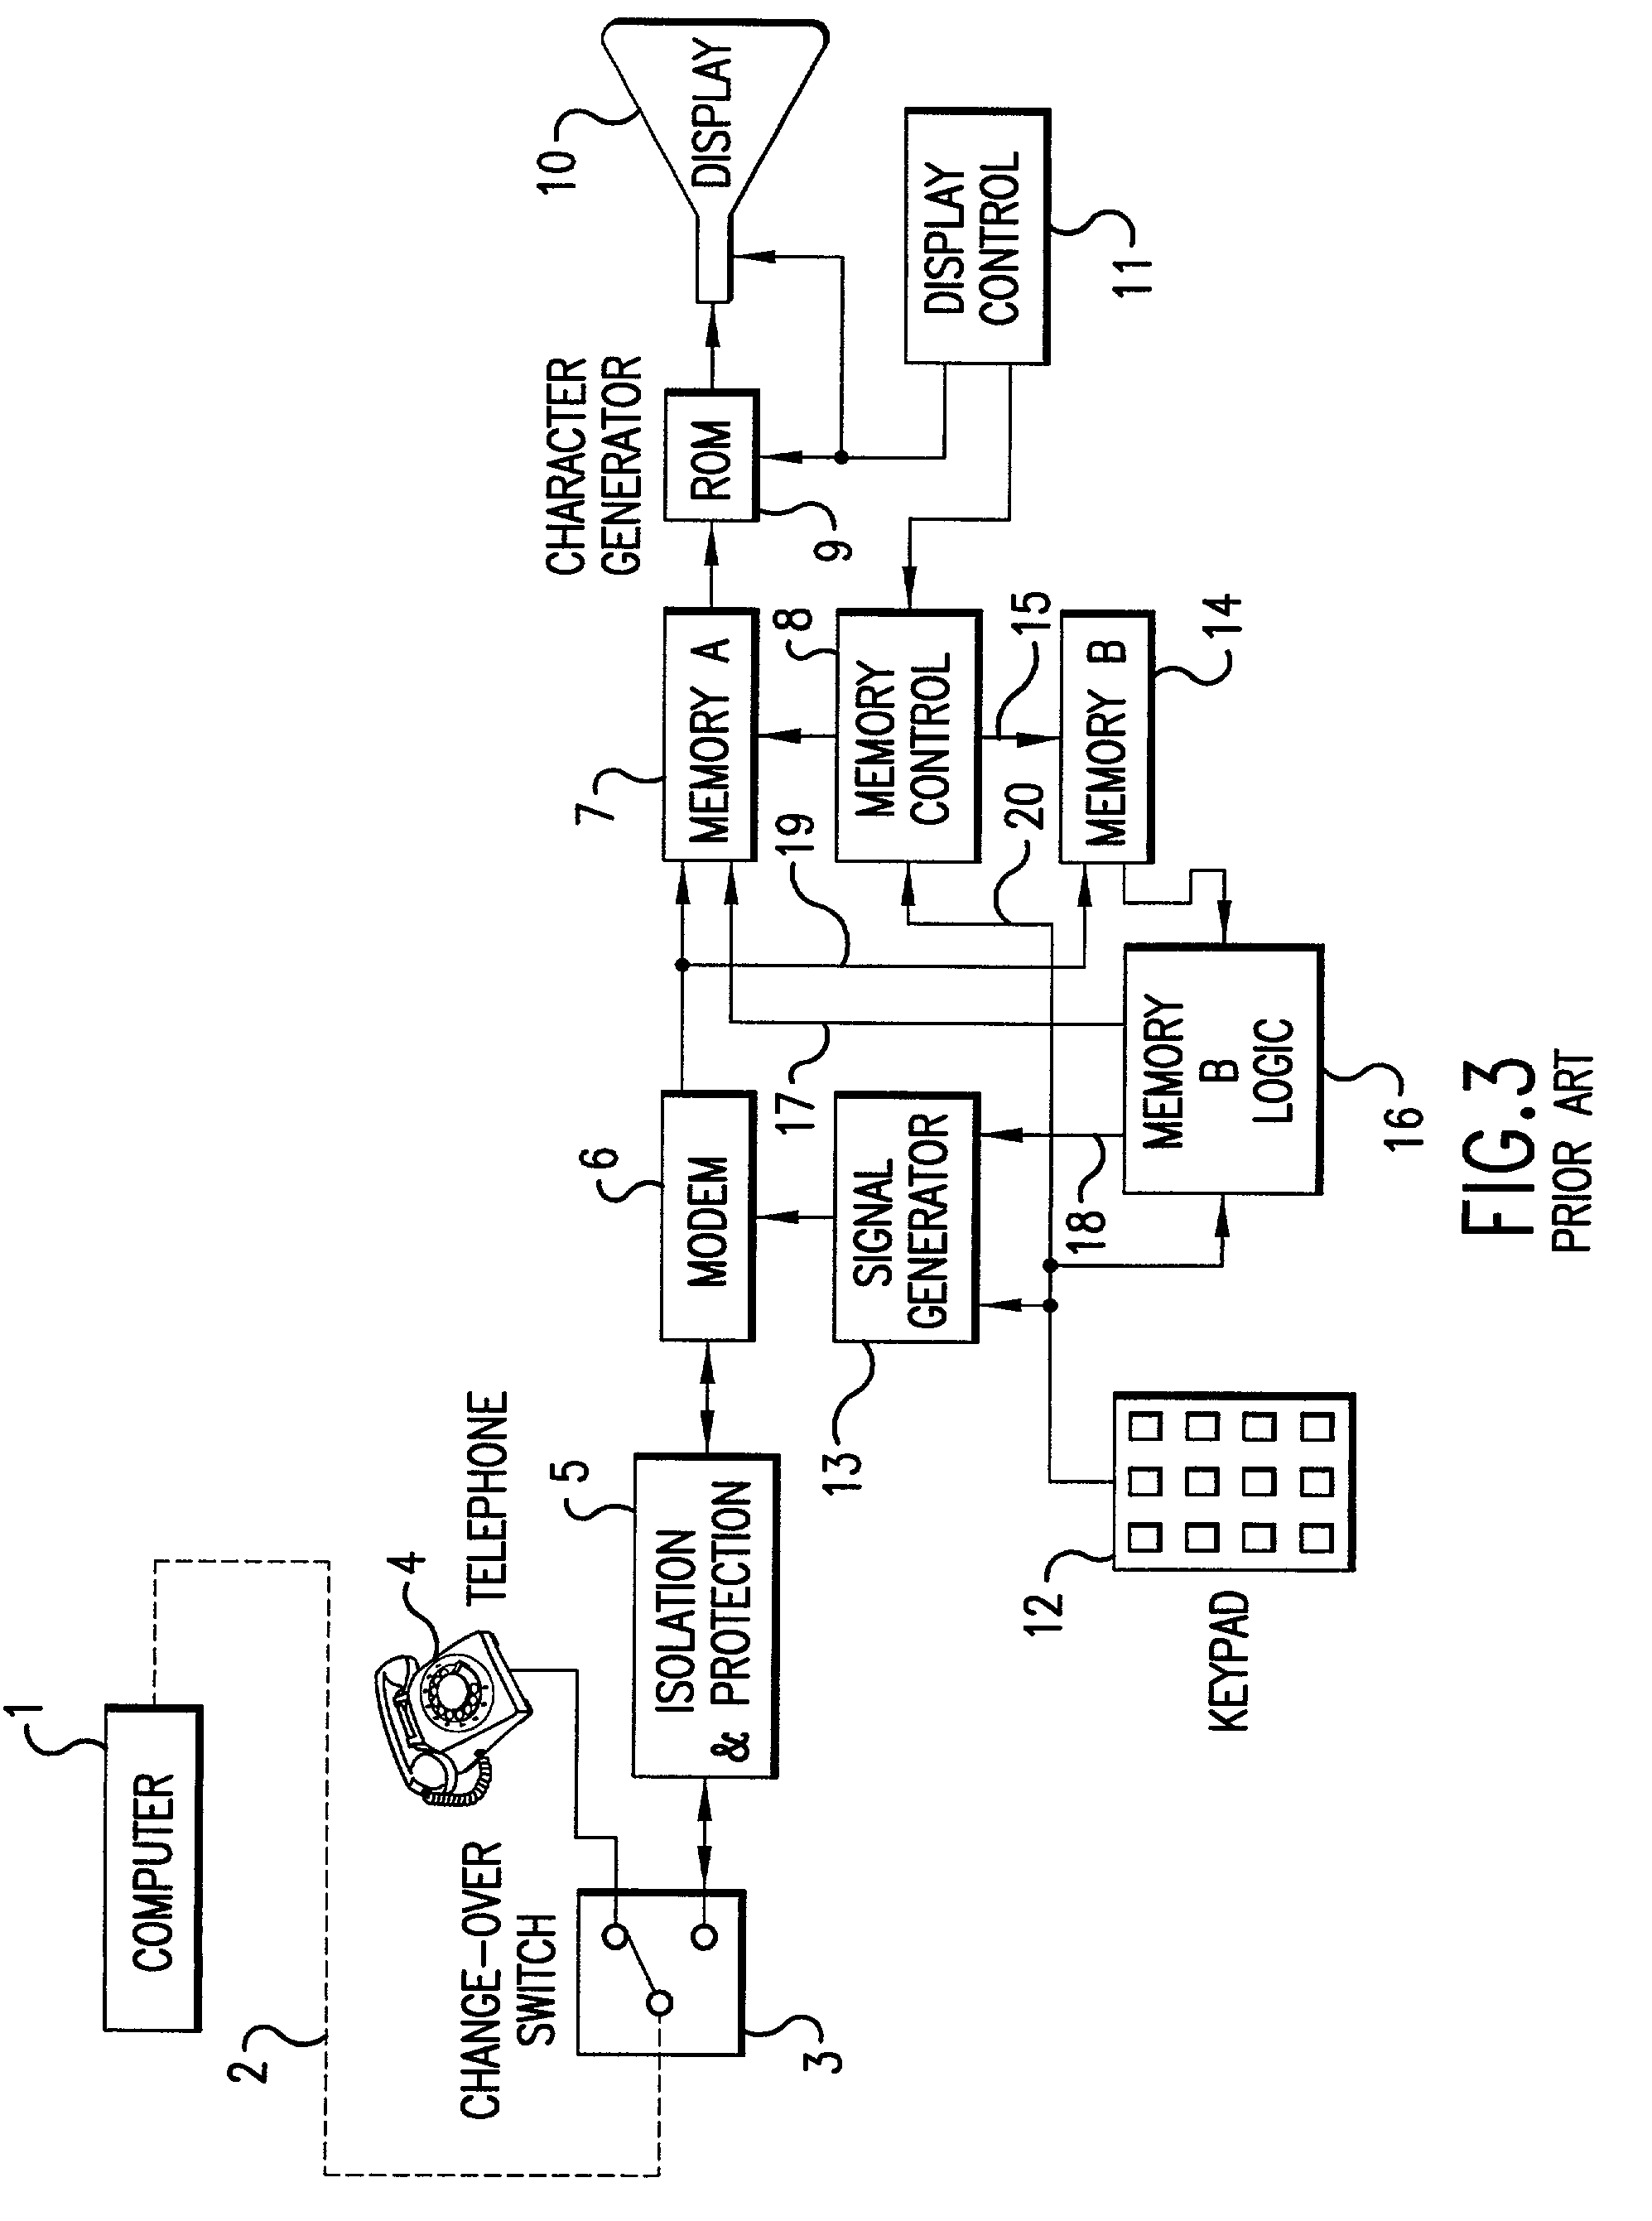 Distributed link processing system for delivering application and multi-media content on the internet